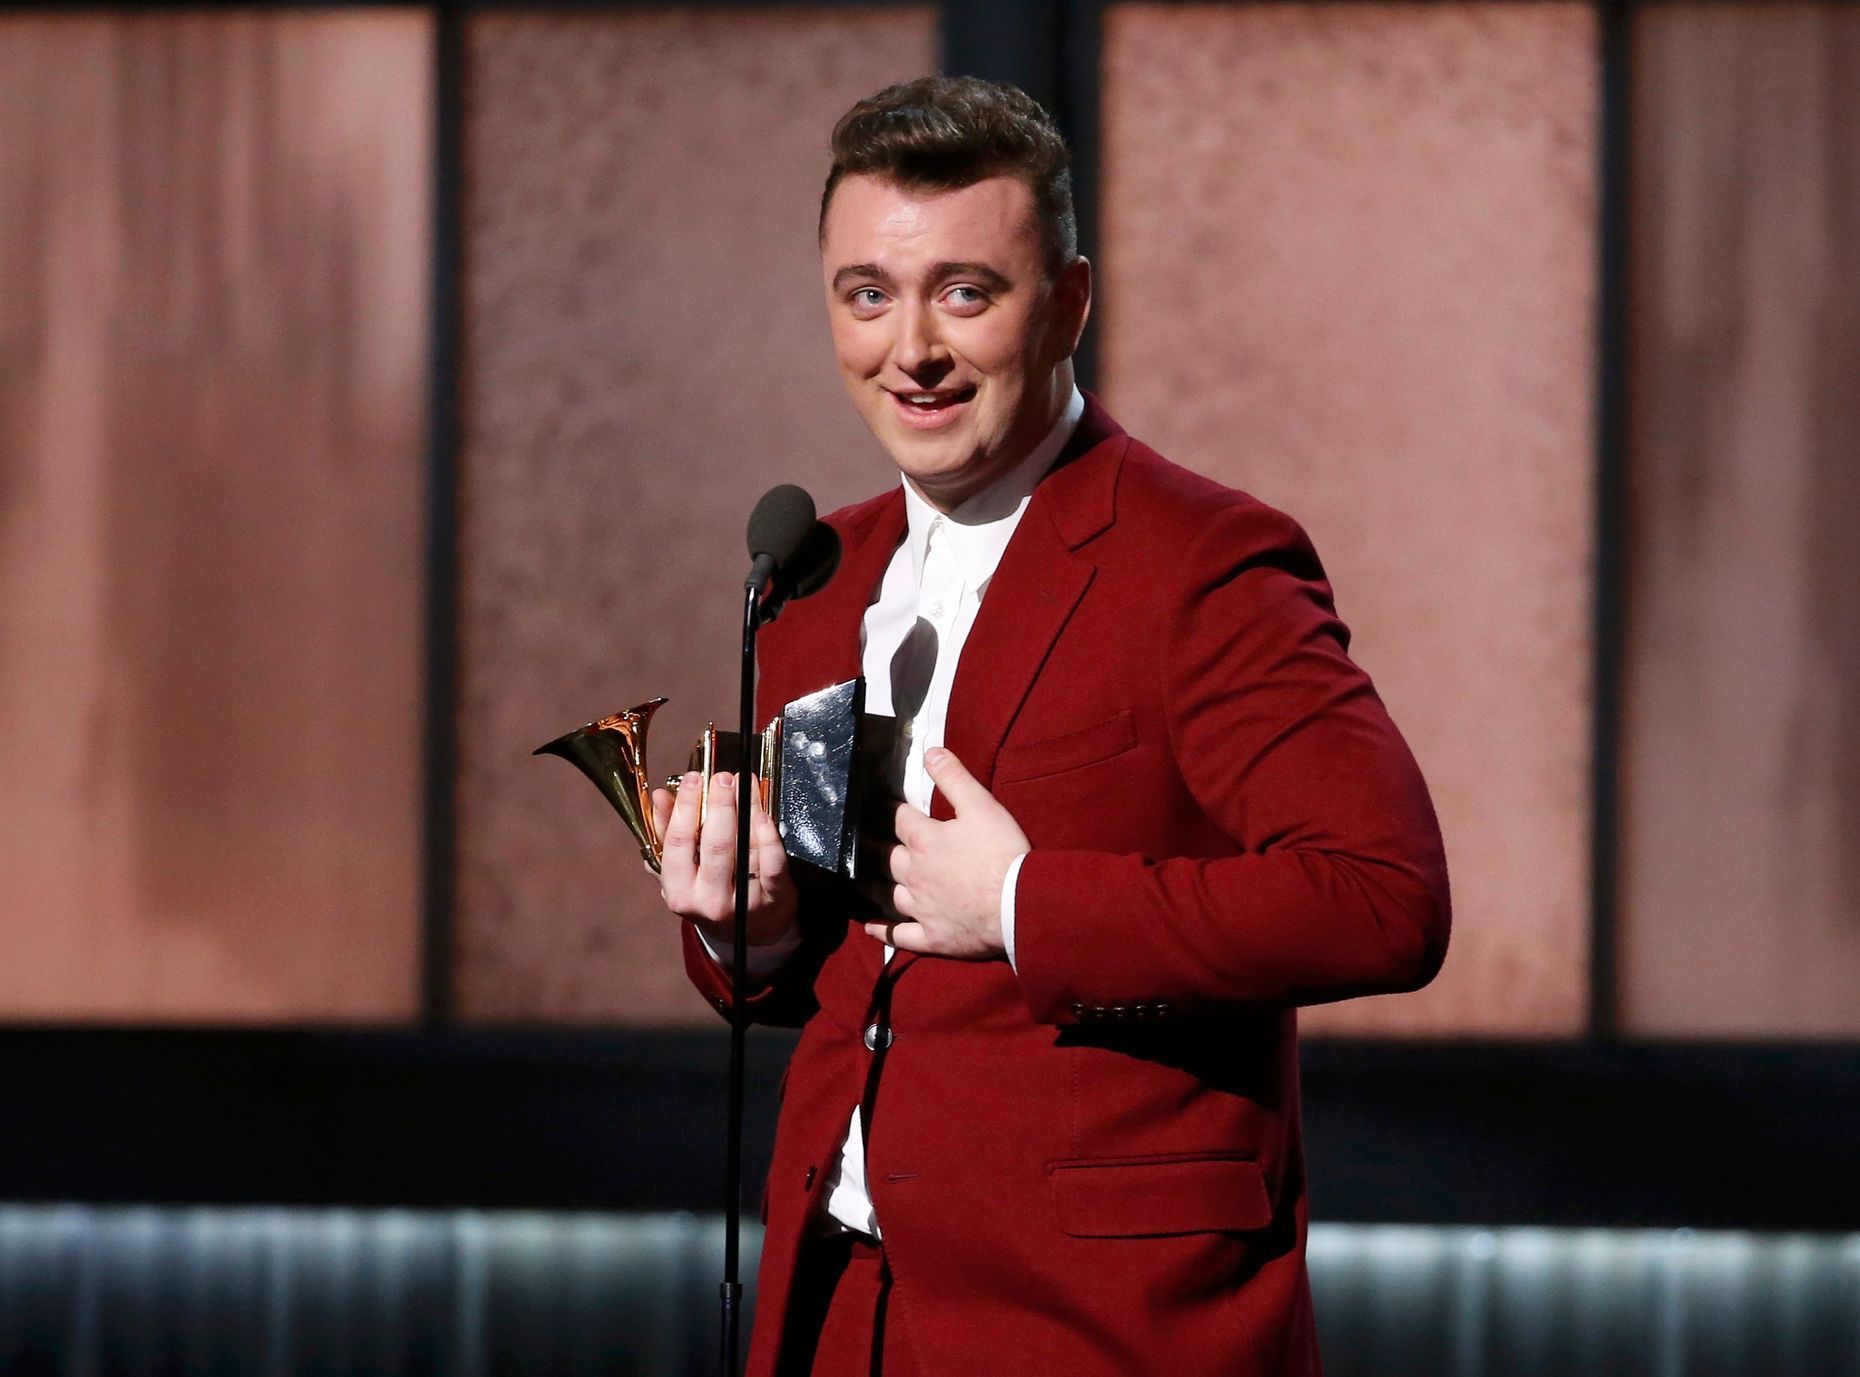 Sam Smith accepts the award for best new artist at the 57th annual Grammy Awards in Los Angeles